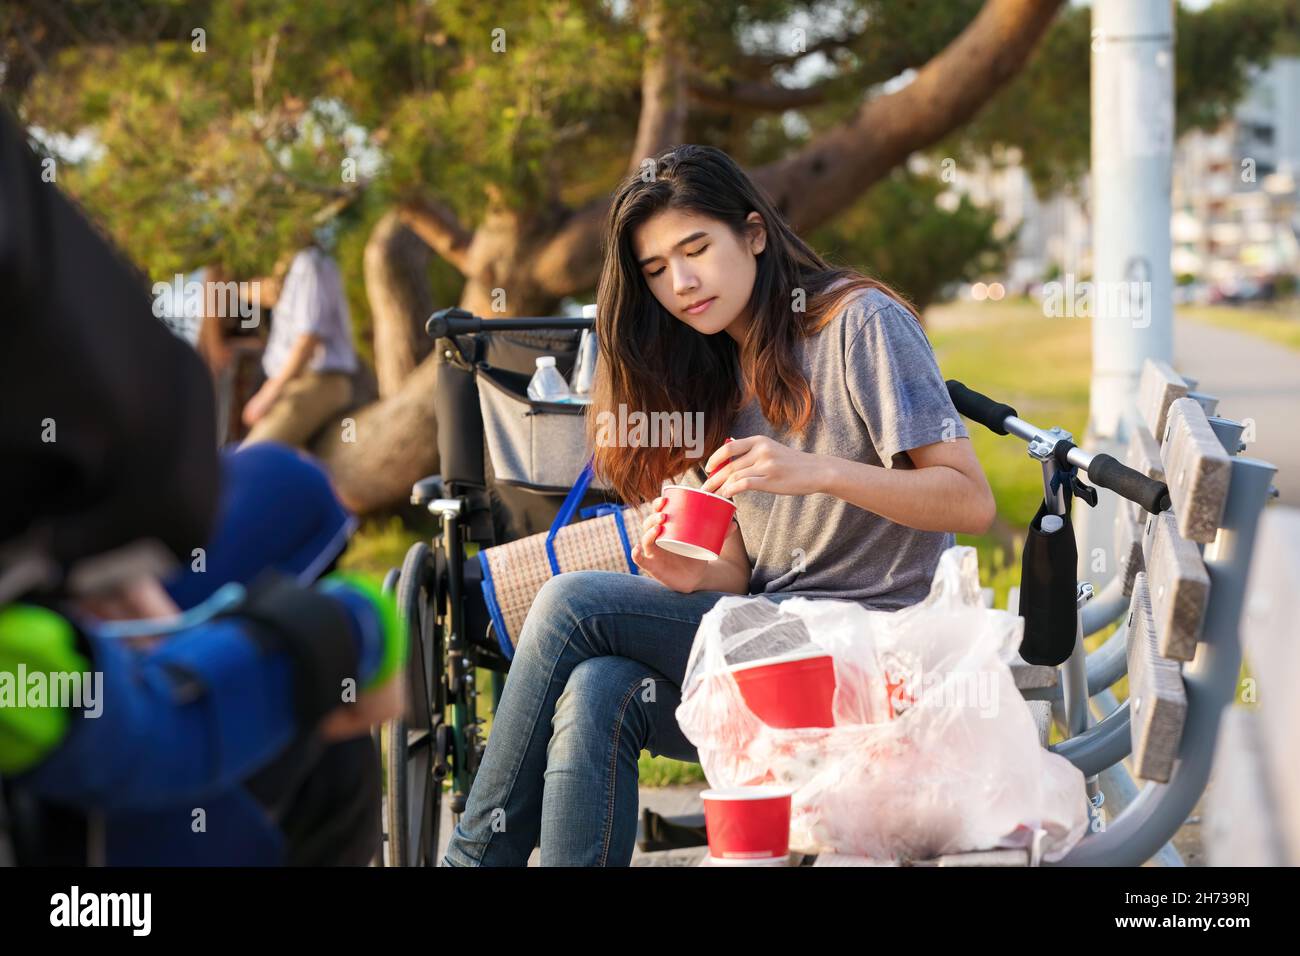 Biracial teen girl sitting outdoors on park bench eating food from red containers, outdoor dining Stock Photo